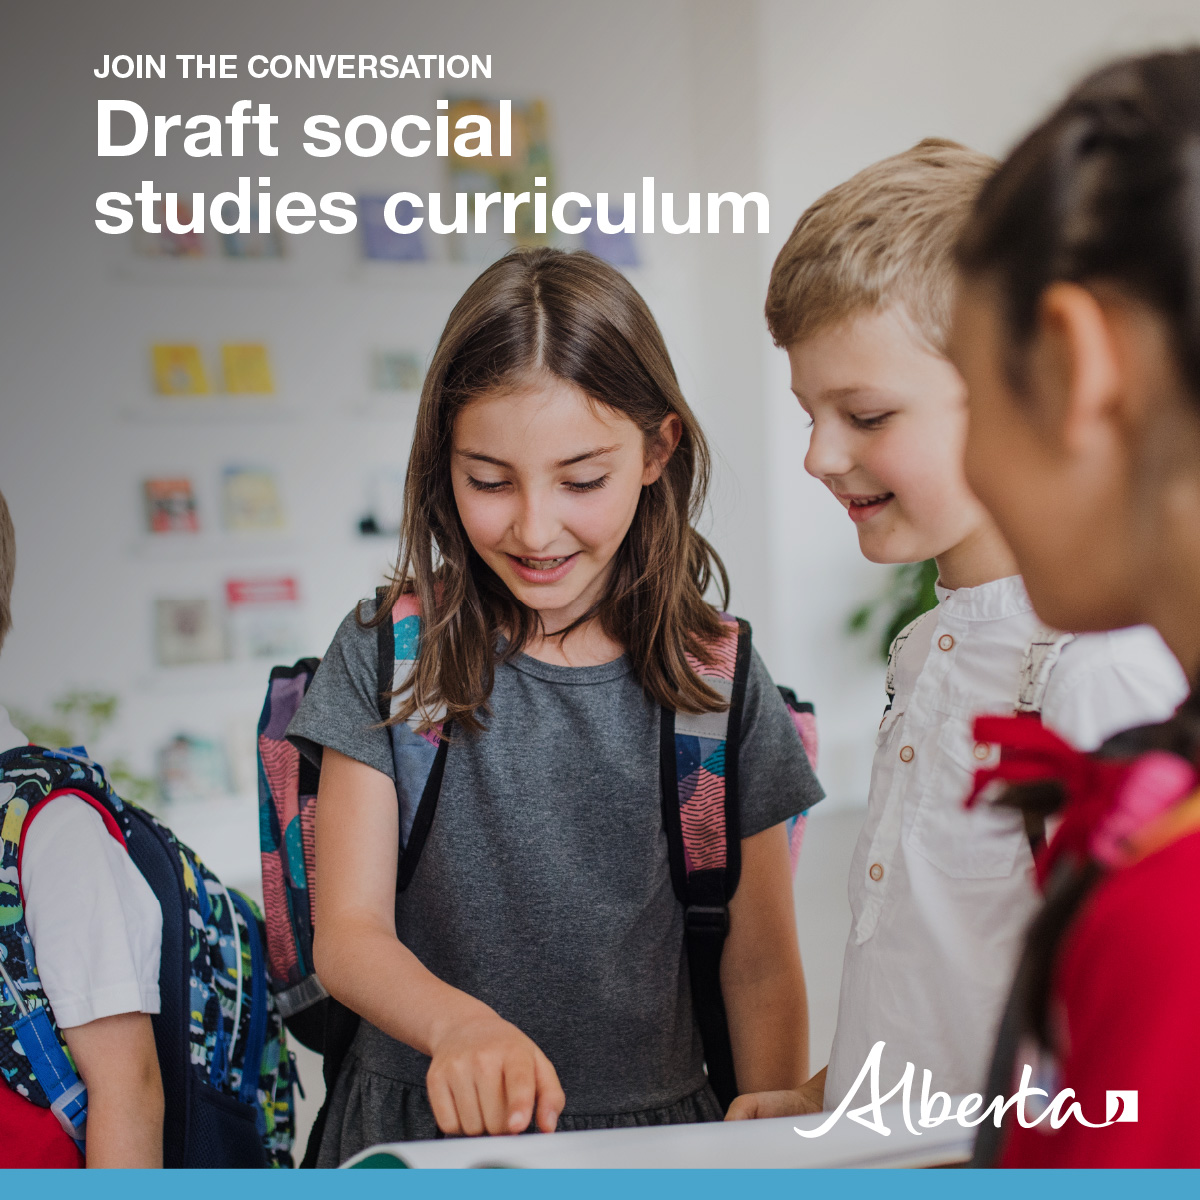 Today is the last day to complete the feedback form at alberta.ca/curriculum-hav… and provide input on key learnings in the new #AbEd draft social studies curriculum!